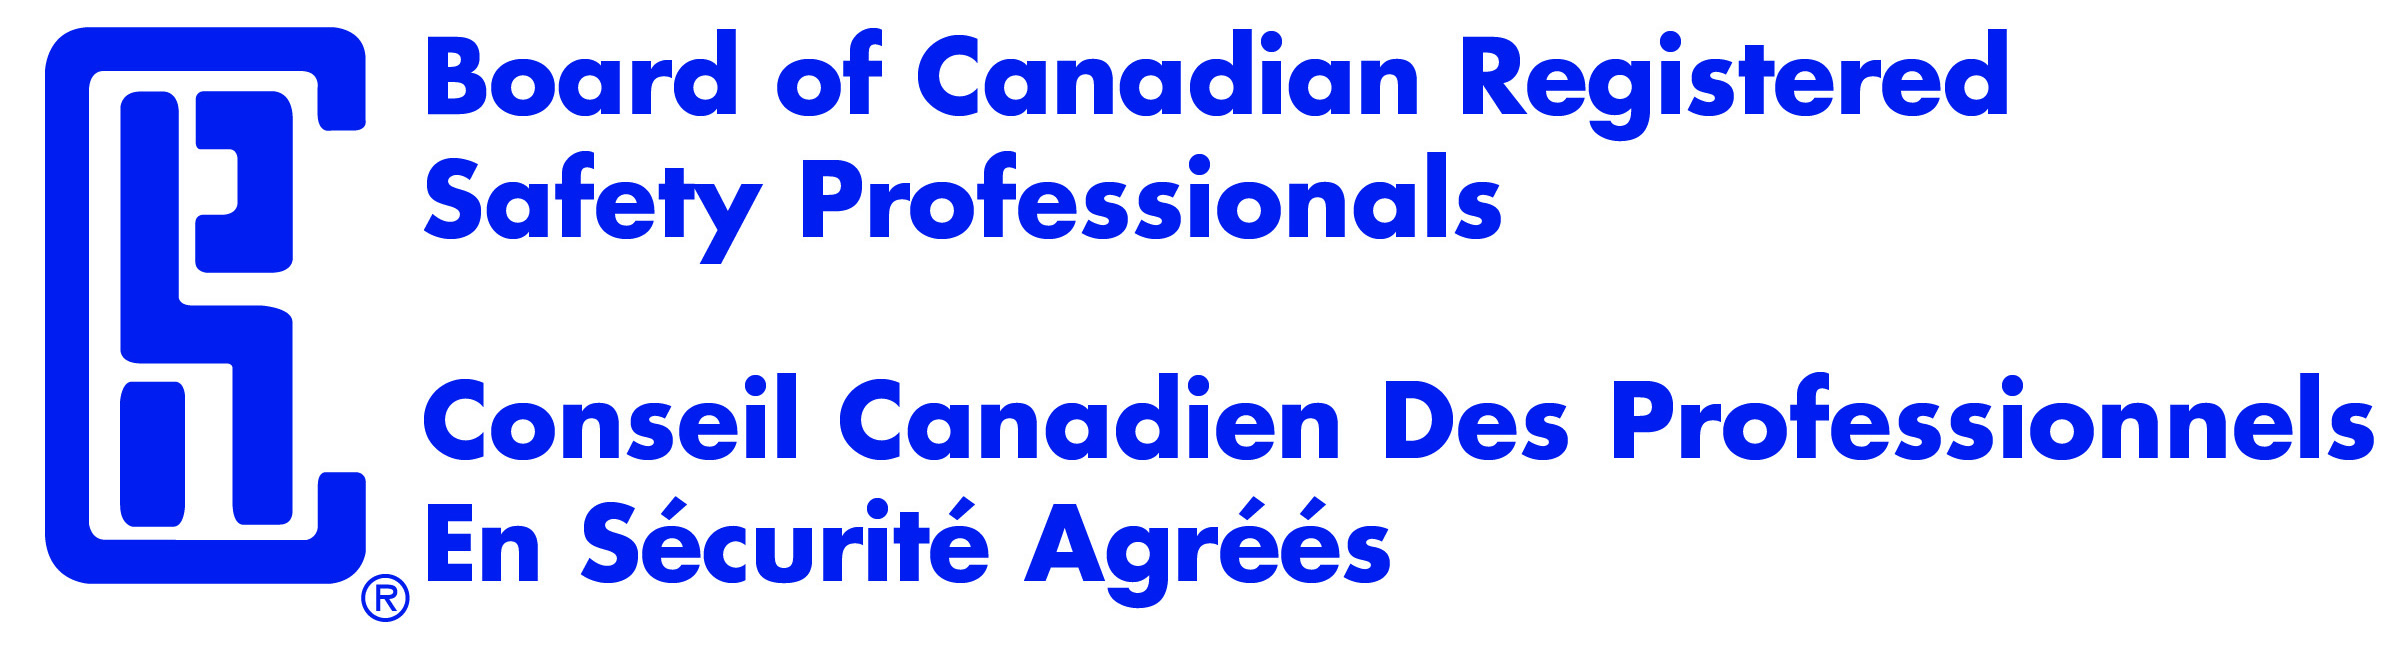 Board of Canadian Registered Safety Professionals